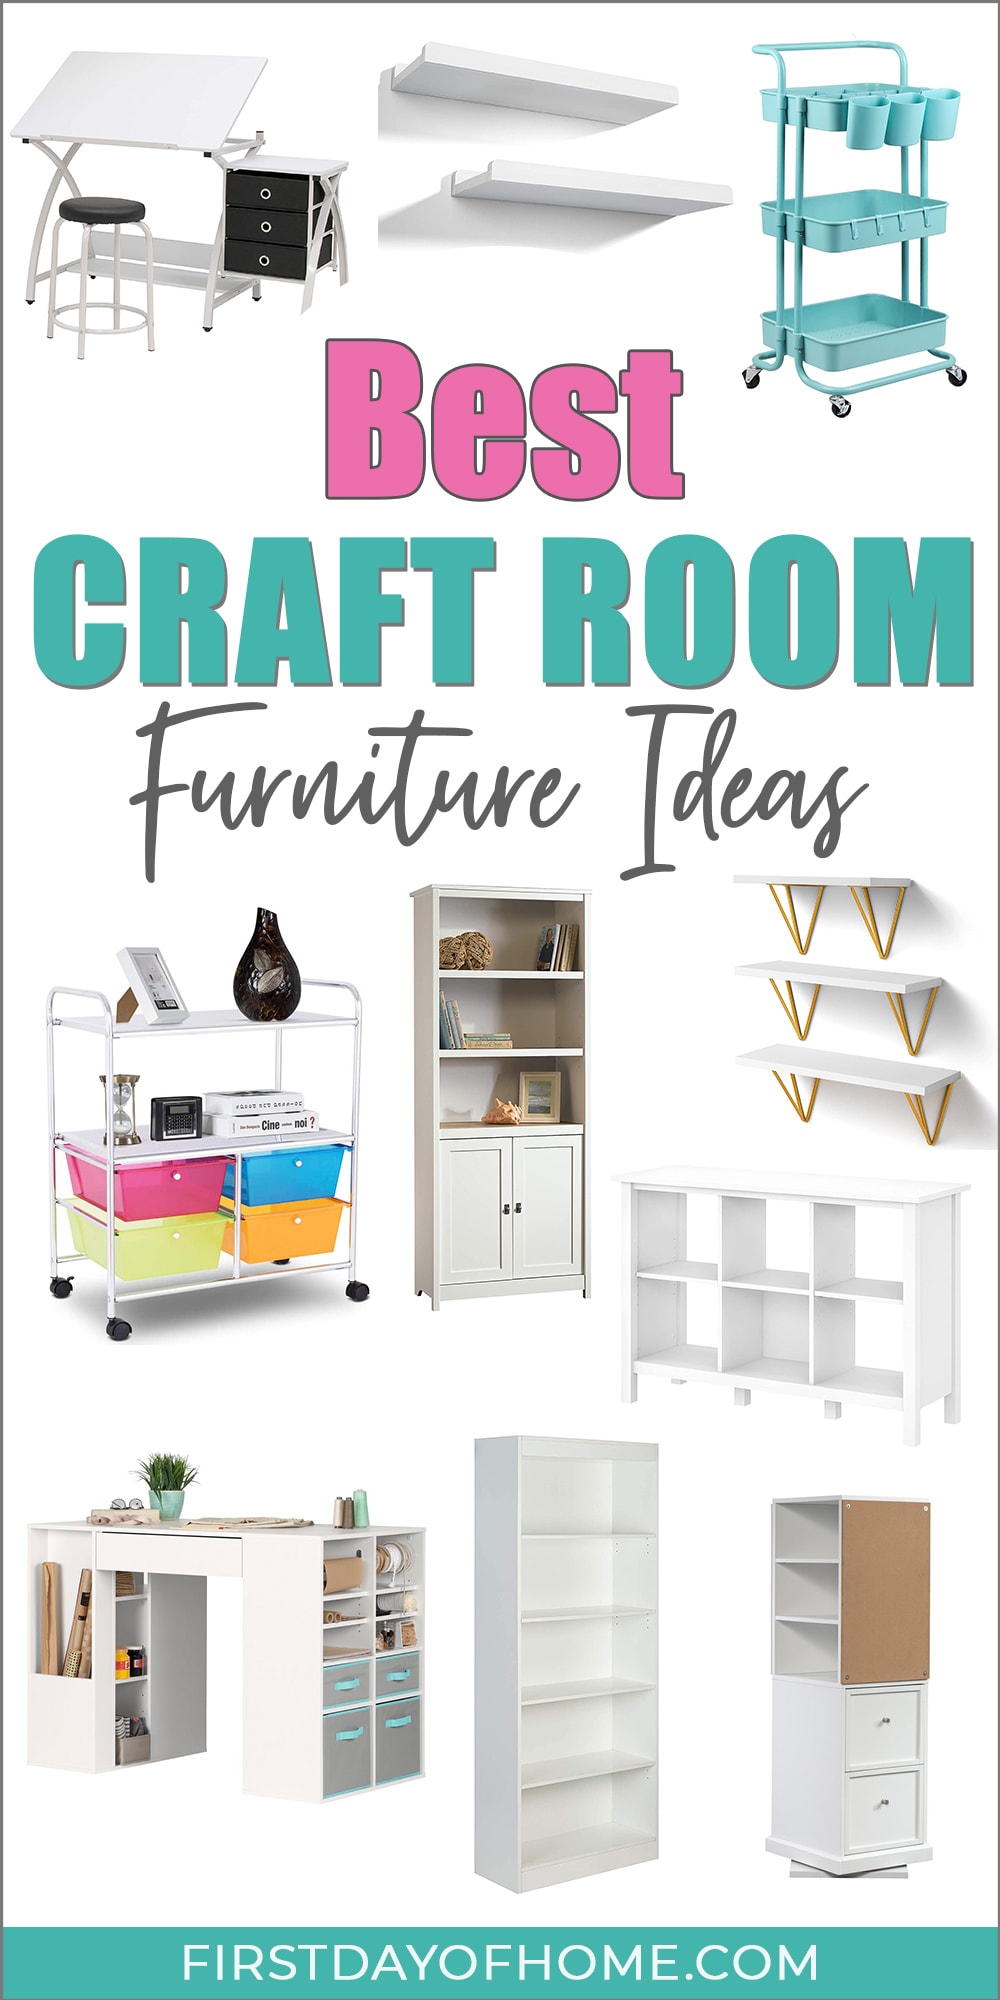 Craft room organization furniture options including desks, carts, shelves, and cubbies. Text overlay reads "Best Craft Room Furniture Ideas"